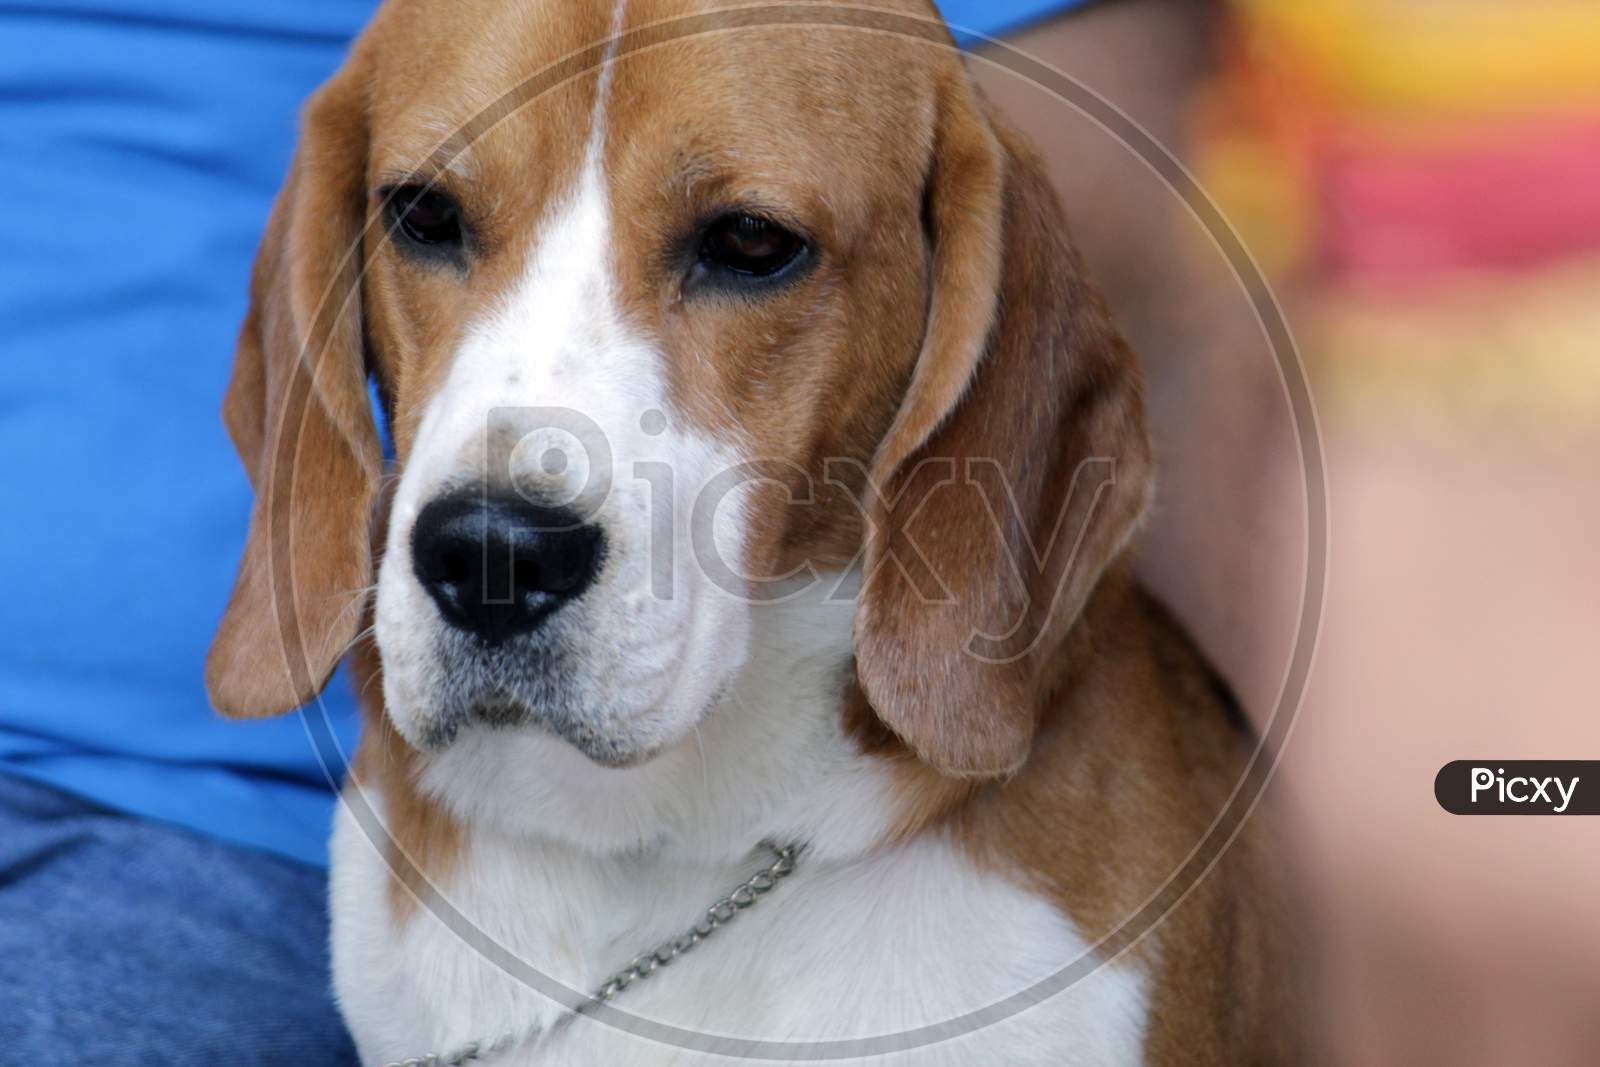 Brown White colored 'Beagle' Dog sitting with closeup view.